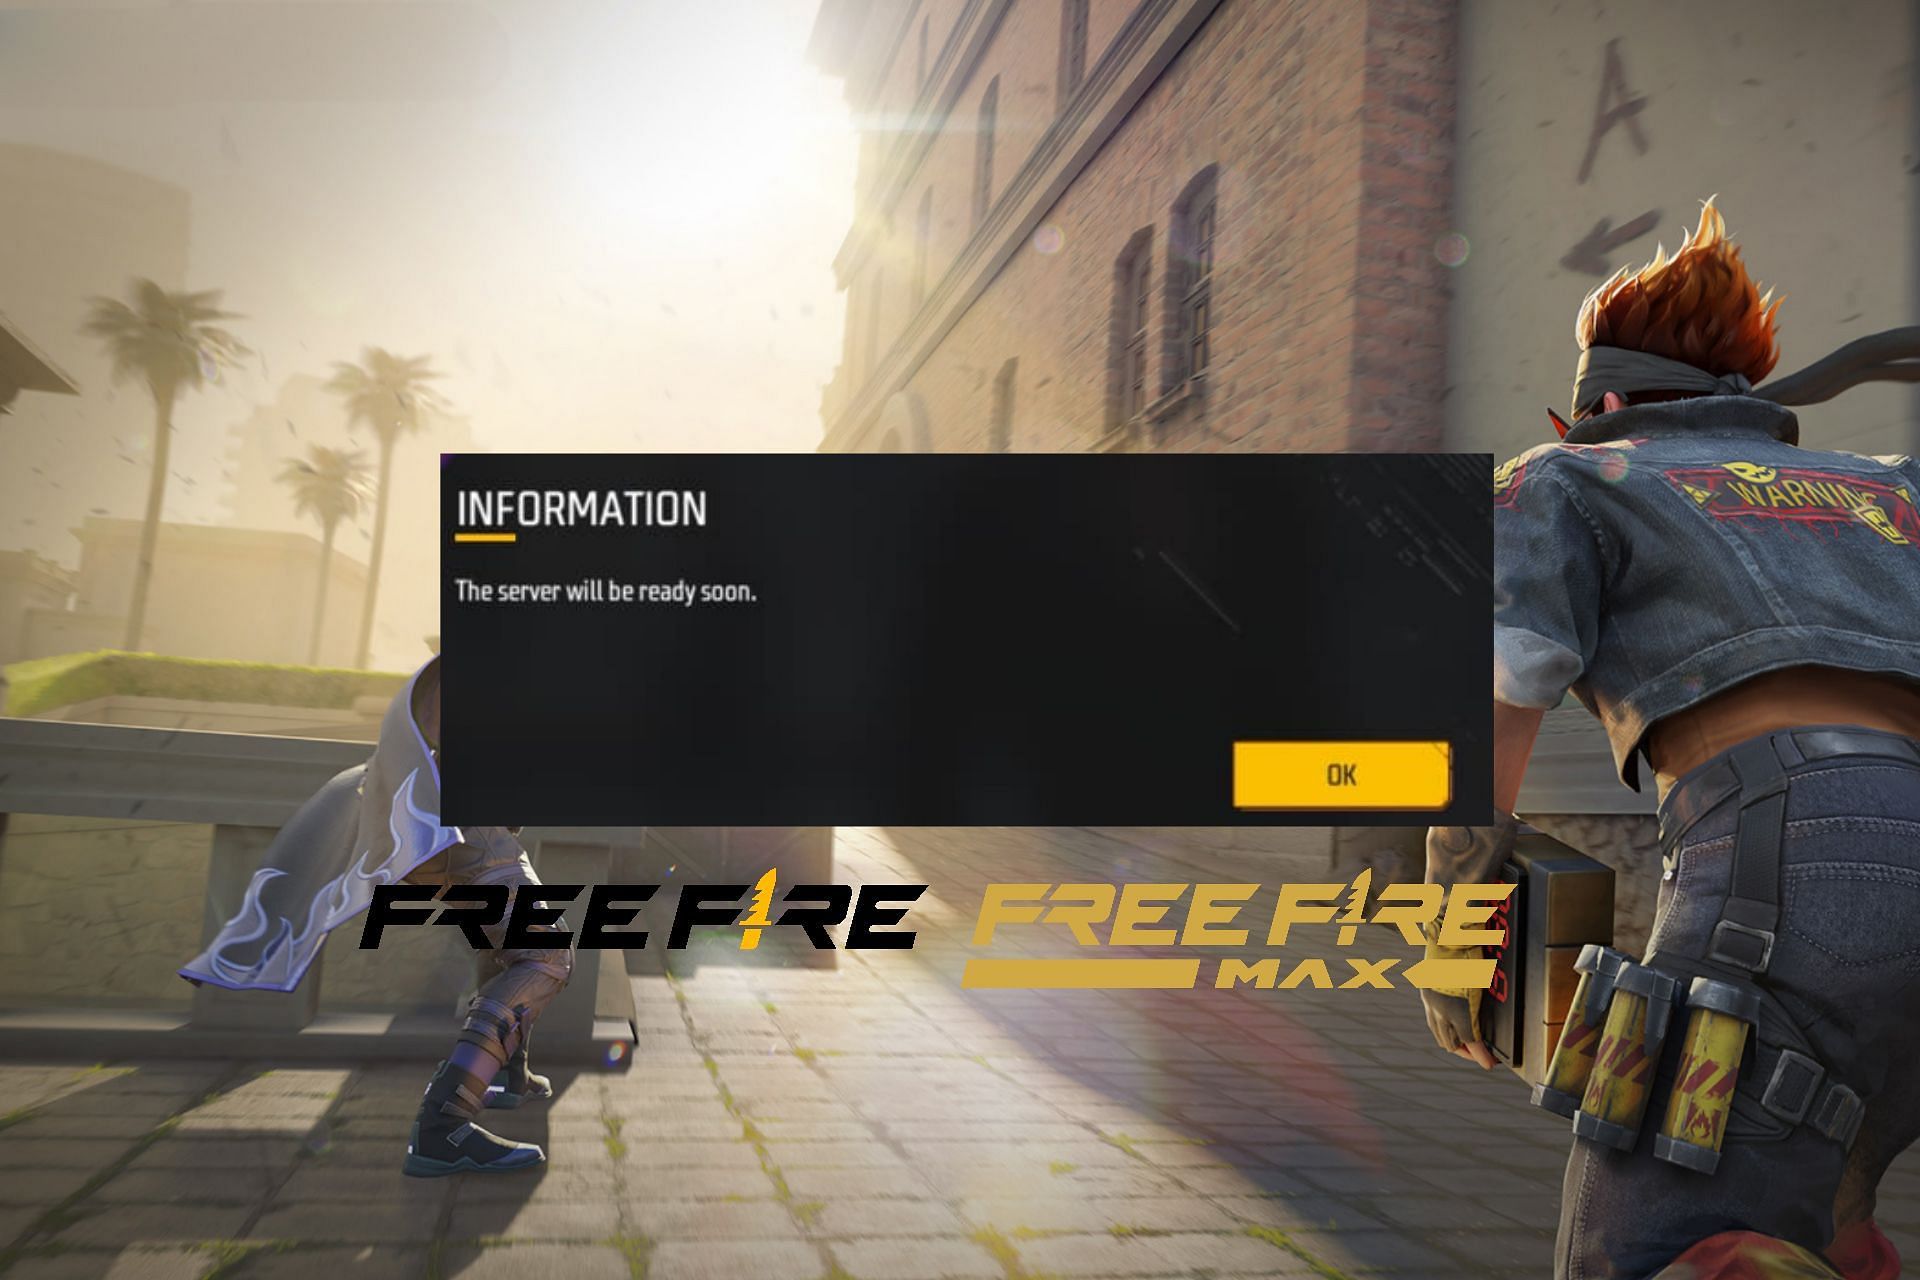 Free Fire MAX will become playable in a few hours (Image via Sportskeeda)